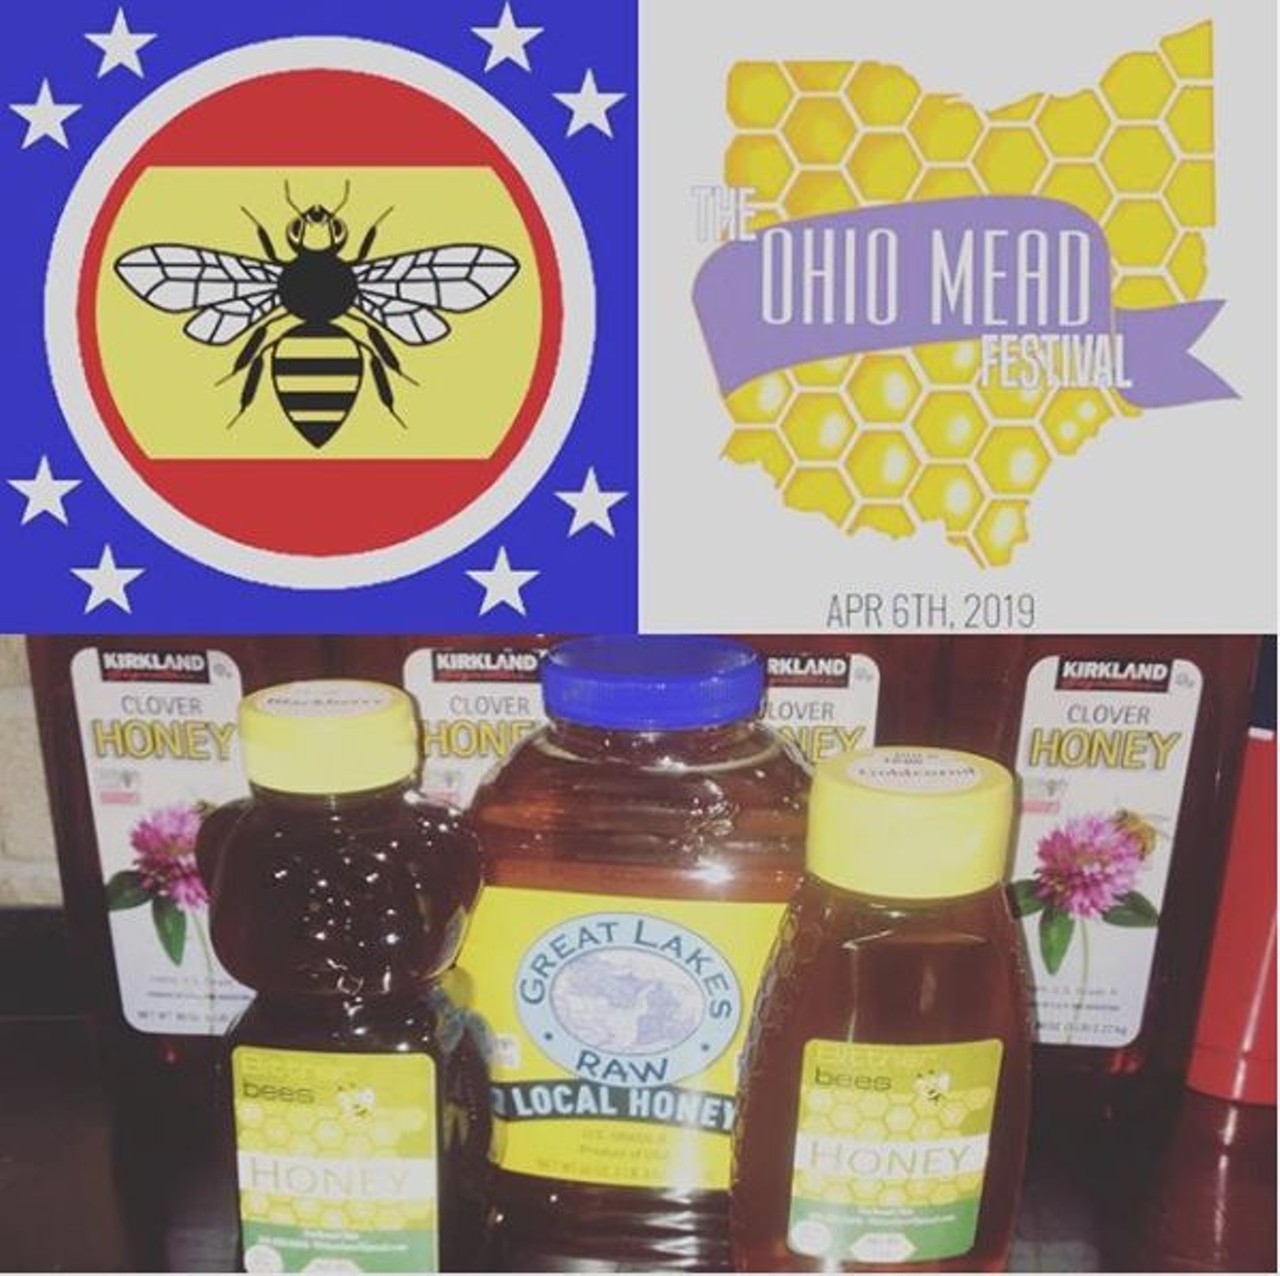 The Ohio Mead Festival
Sat, April 4
Skidmark Garage, 5410 Hamilton Ave., info@ofcollective.com
Enjoy samples of Ohio Honey Wine at this year&#146;s Ohio Mead Festival. The event will feature old and new vendors this year so get ready.
Photo via @eans_brew/Instagram